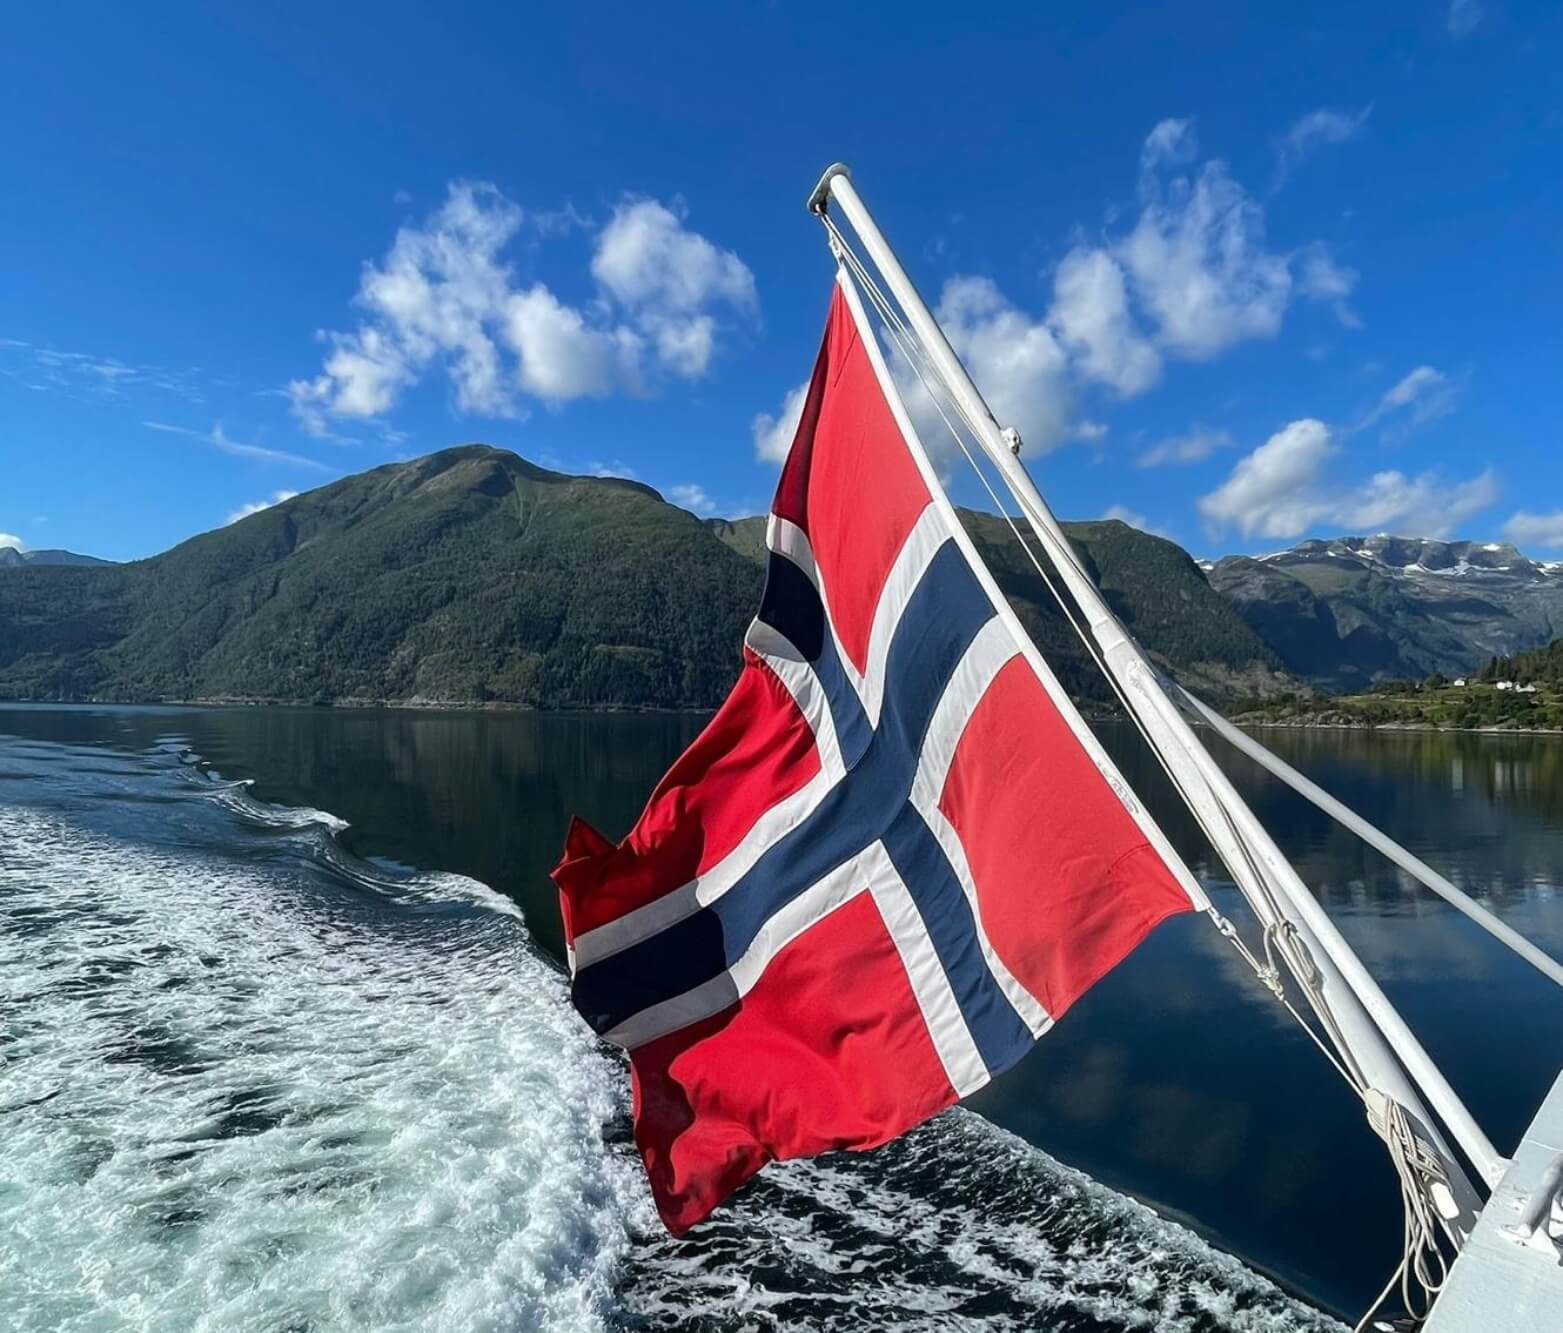 On the Sognefjord in Norway